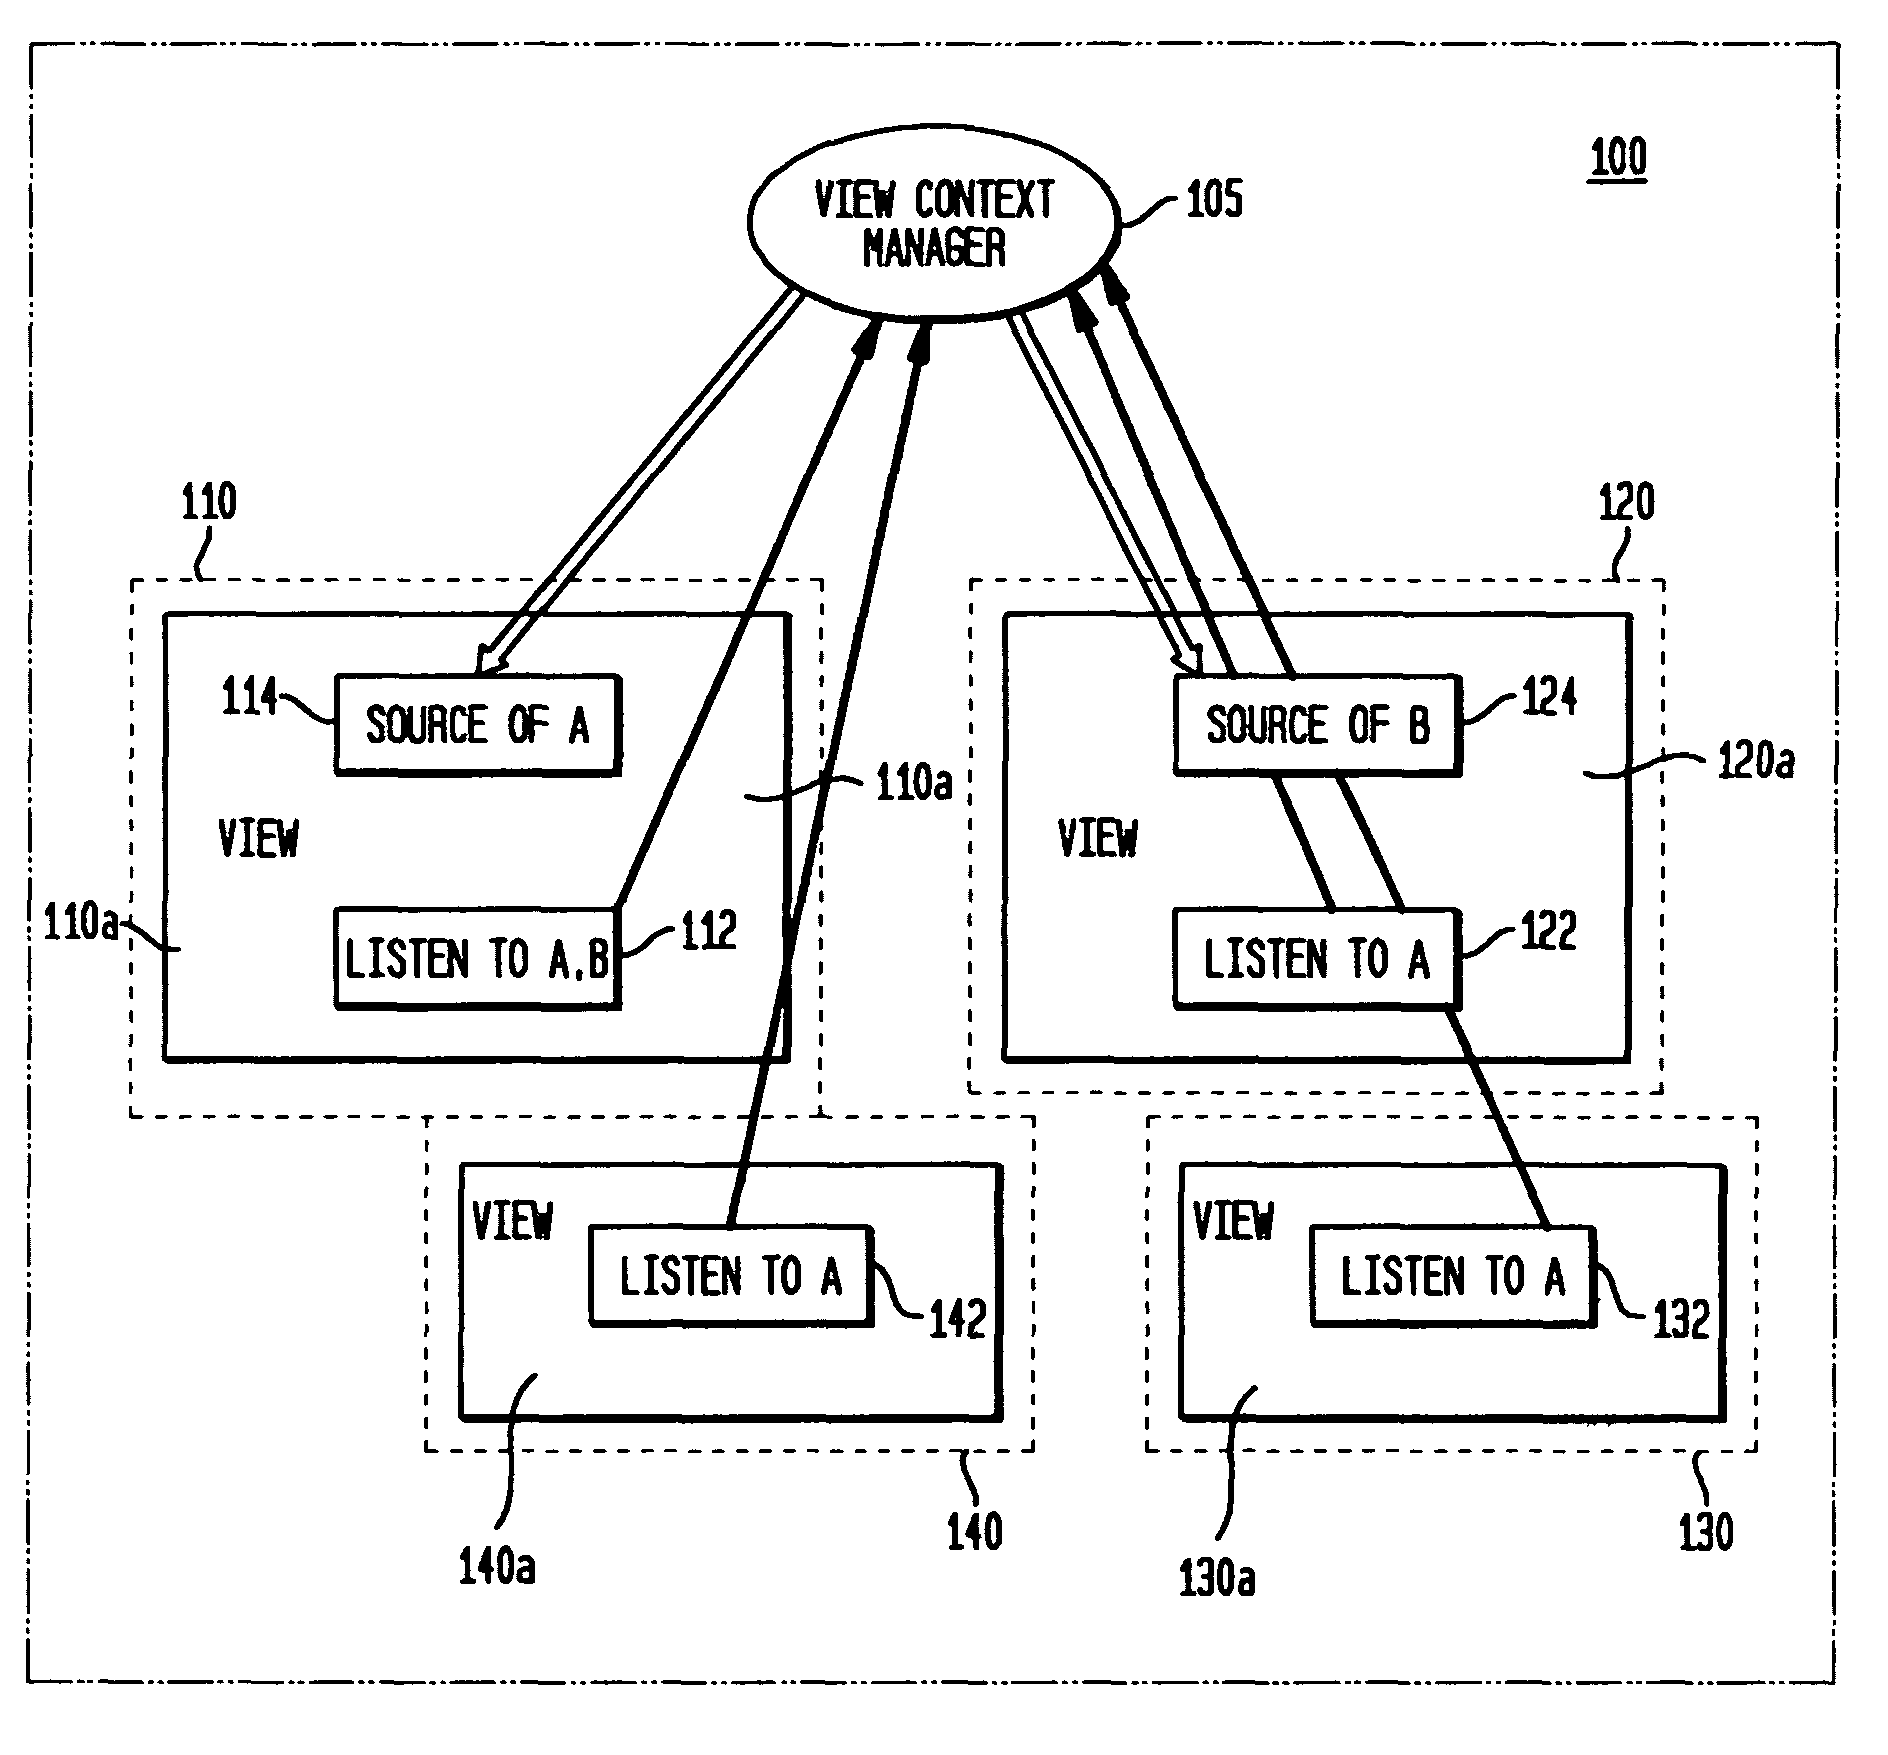 Method and system for sharing and managing context information